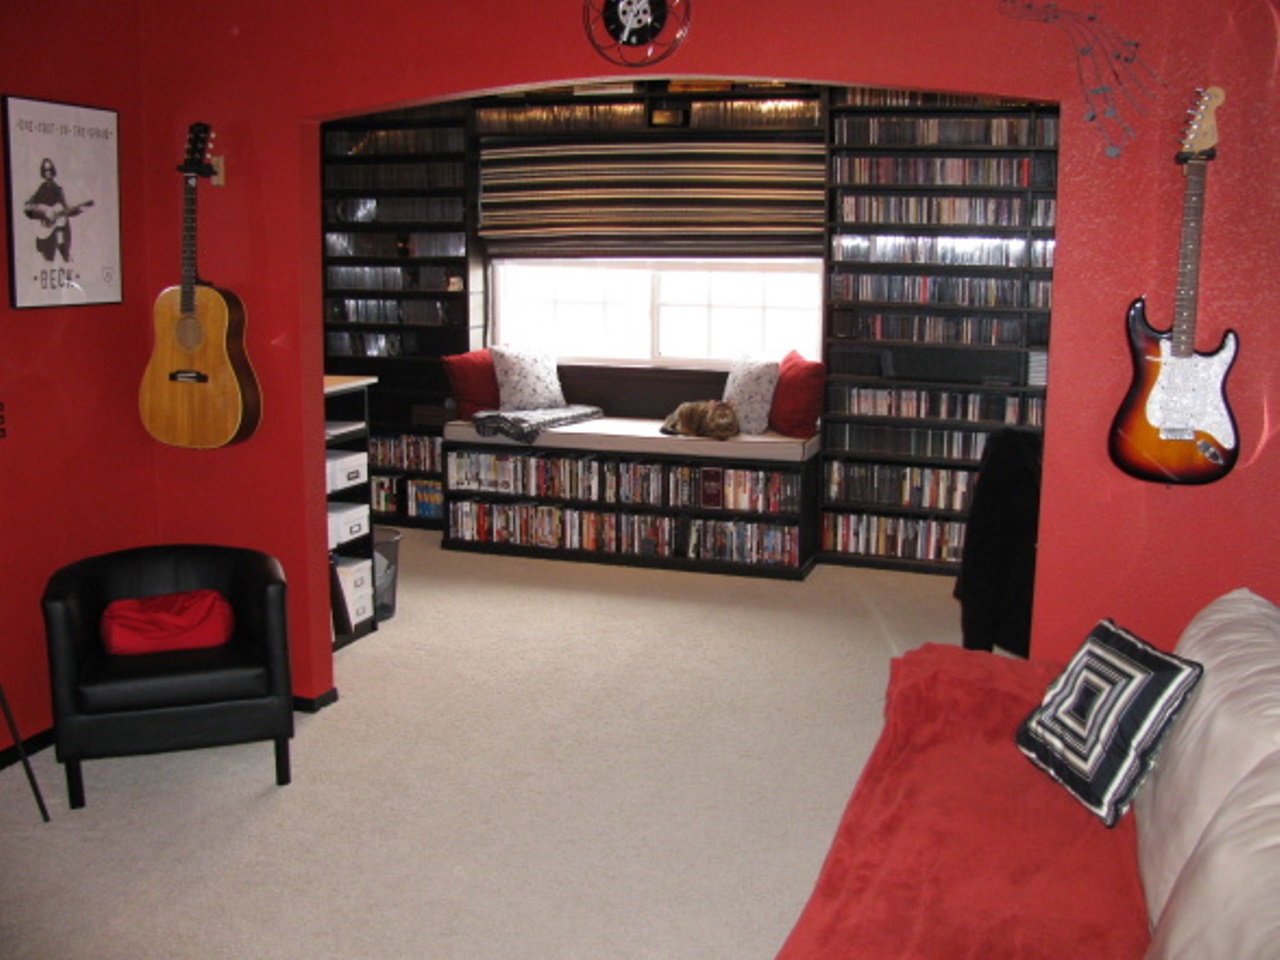 http://audiophilereview.com/images/roon2.jpg